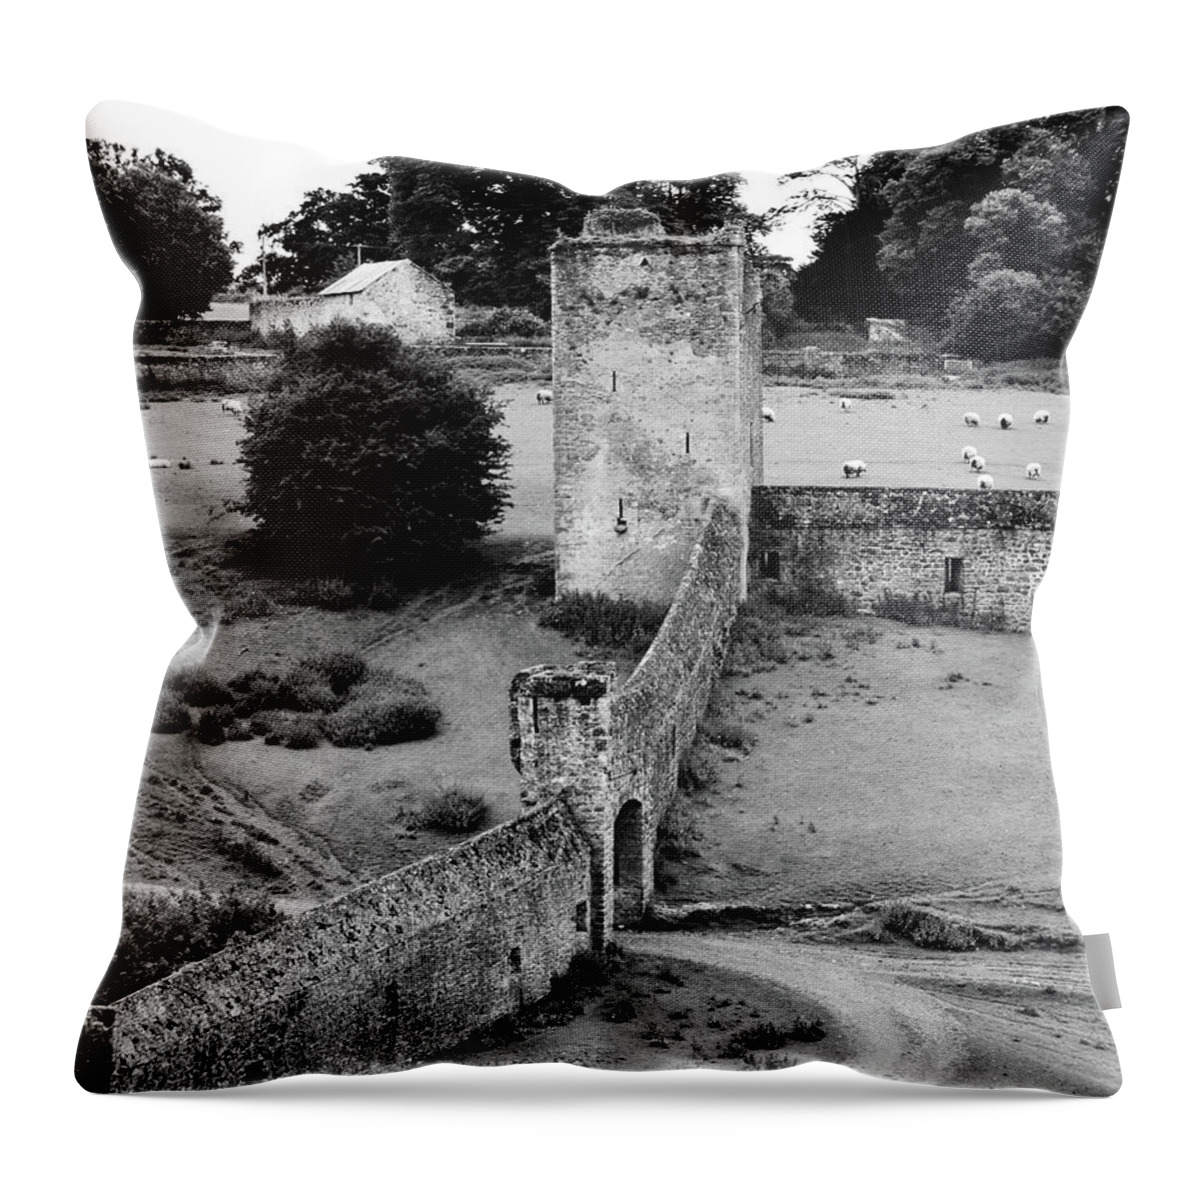 Kells Throw Pillow featuring the photograph Kells Priory Outer Wall Gatehouse and Fortified Tower County Kilkenny Ireland Black and White by Shawn O'Brien